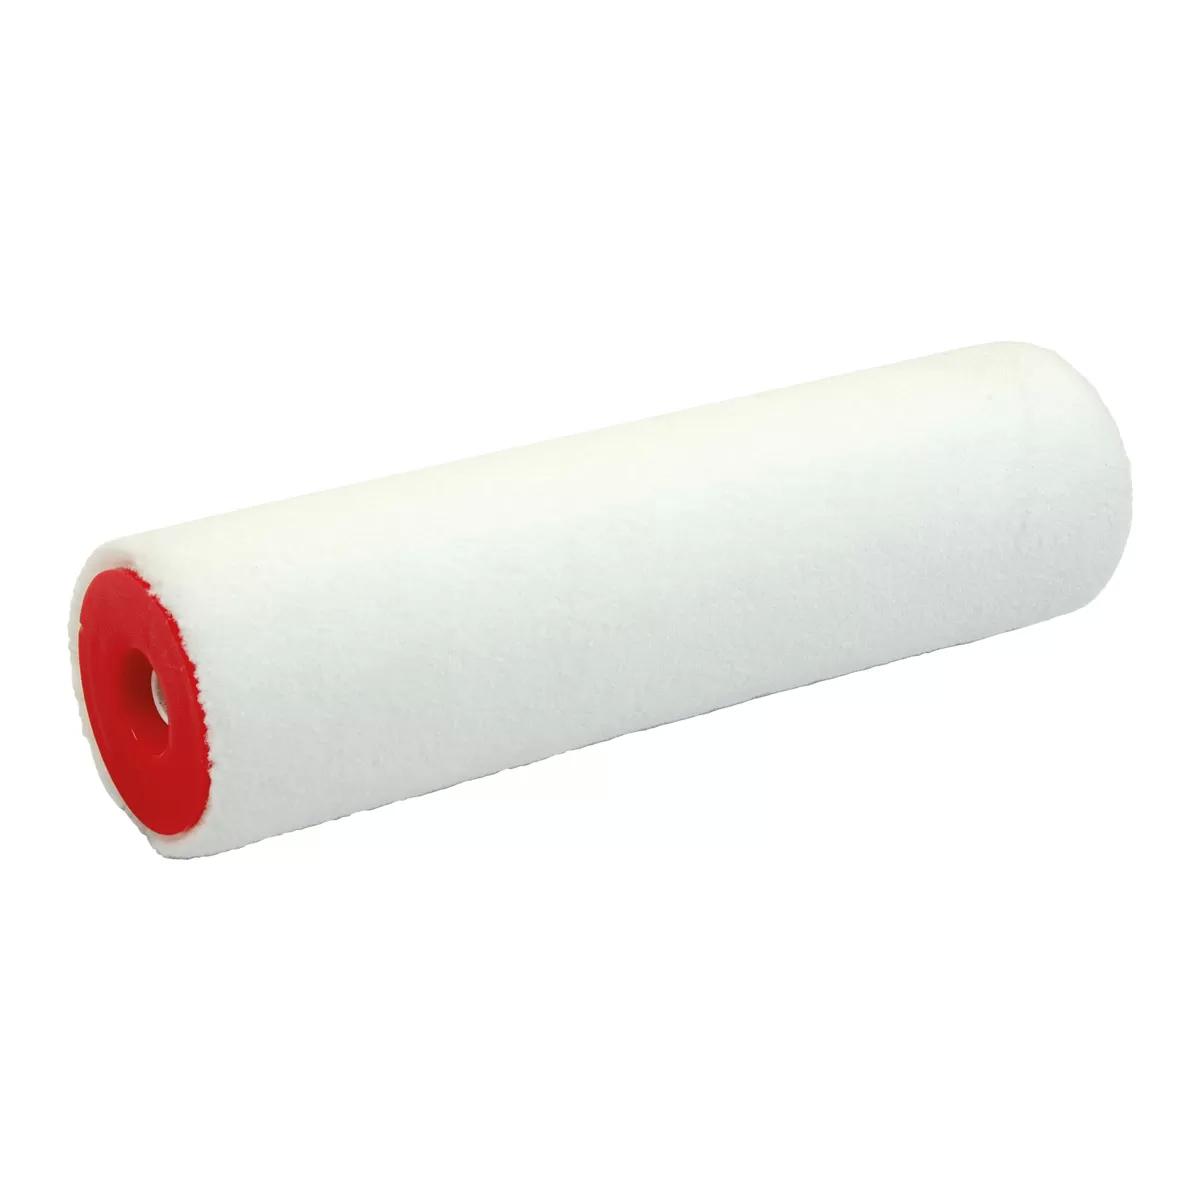 Paint roller Acryl Gold 23cm ø8 charge 